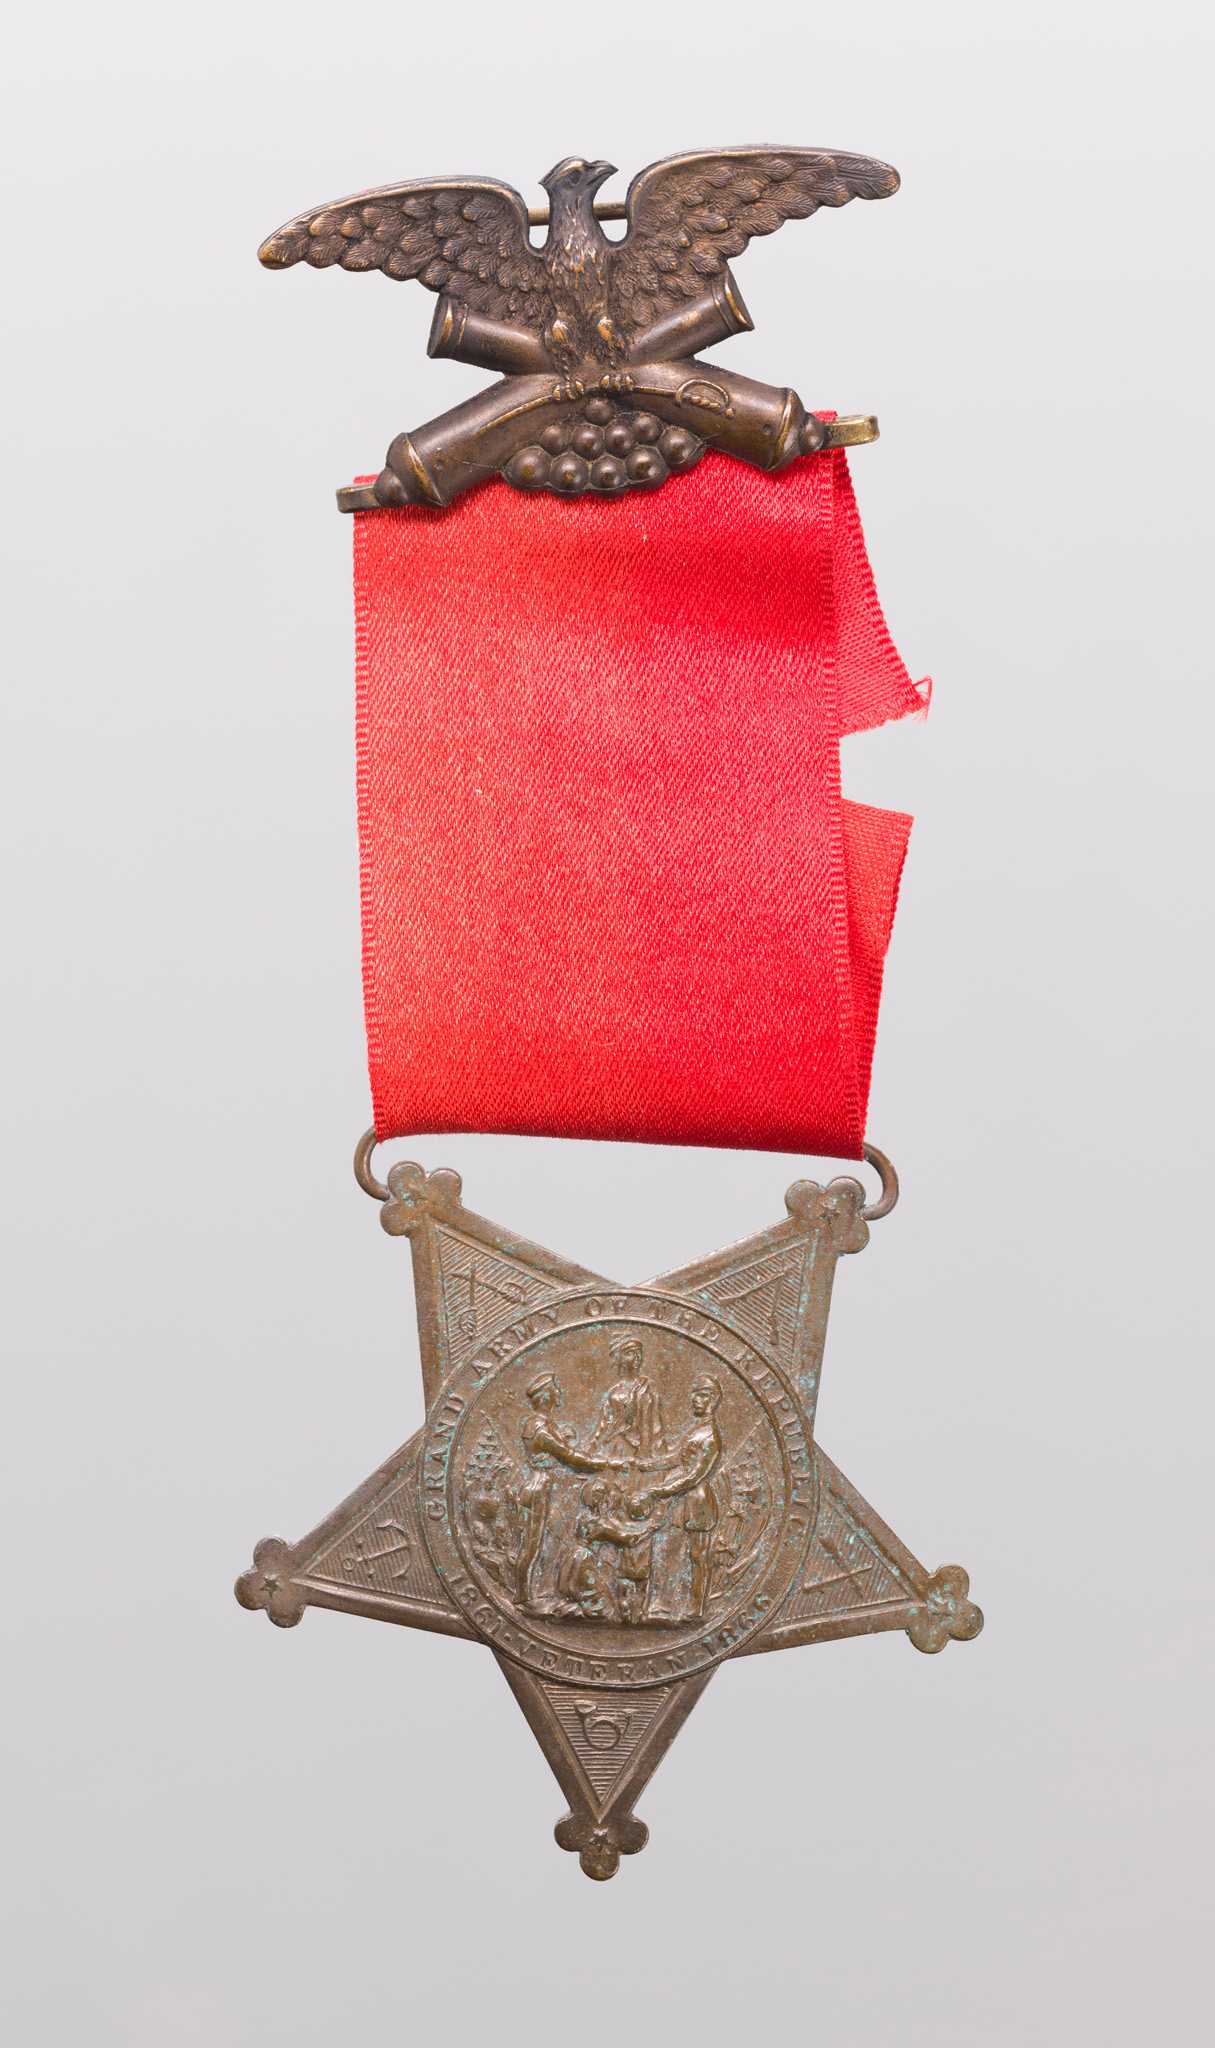 A Grand Army of the Republic medal owned by Marquis Peterson. The medal has a suspension brooch in the shape of an eagle with spread wings above crossed canons. It is attached to a red ribbon. A metal suspender attaches the medal to the ribbon. The medal is in the shape of a five-pointed star. The front of the medal Has the seal of the Grand Army of the Republic at center. The seal shows a sailor and soldier next to American flags. They are shaking hands in front of a standing woman. A kneeling woman and a standing child with raised arms are between the sailor and soldier. Embossed lettering circles the seal around the edge and reads “GRAND ARMY OF THE REPUBLIC” at top and “1861 VETERAN 1866” at the bottom. Around the seal on each point of the star additional emblems are embossed. They are crossed sabers, crossed rifles, crossed cannons, a bugle and an anchor. The back of the medal has a shield at center. This is surrounded by 8 fraternal symbols forming a circle. This circle is surrounded by another circle of 16 fraternal symbols. This is encircled by 34 five-pointed stars. The five-star points on the back of the medal also have things embossed on them. The top two connecting to the suspender ae olive branches. The tow on the side are wreaths and the point on the bottom is of a banner.